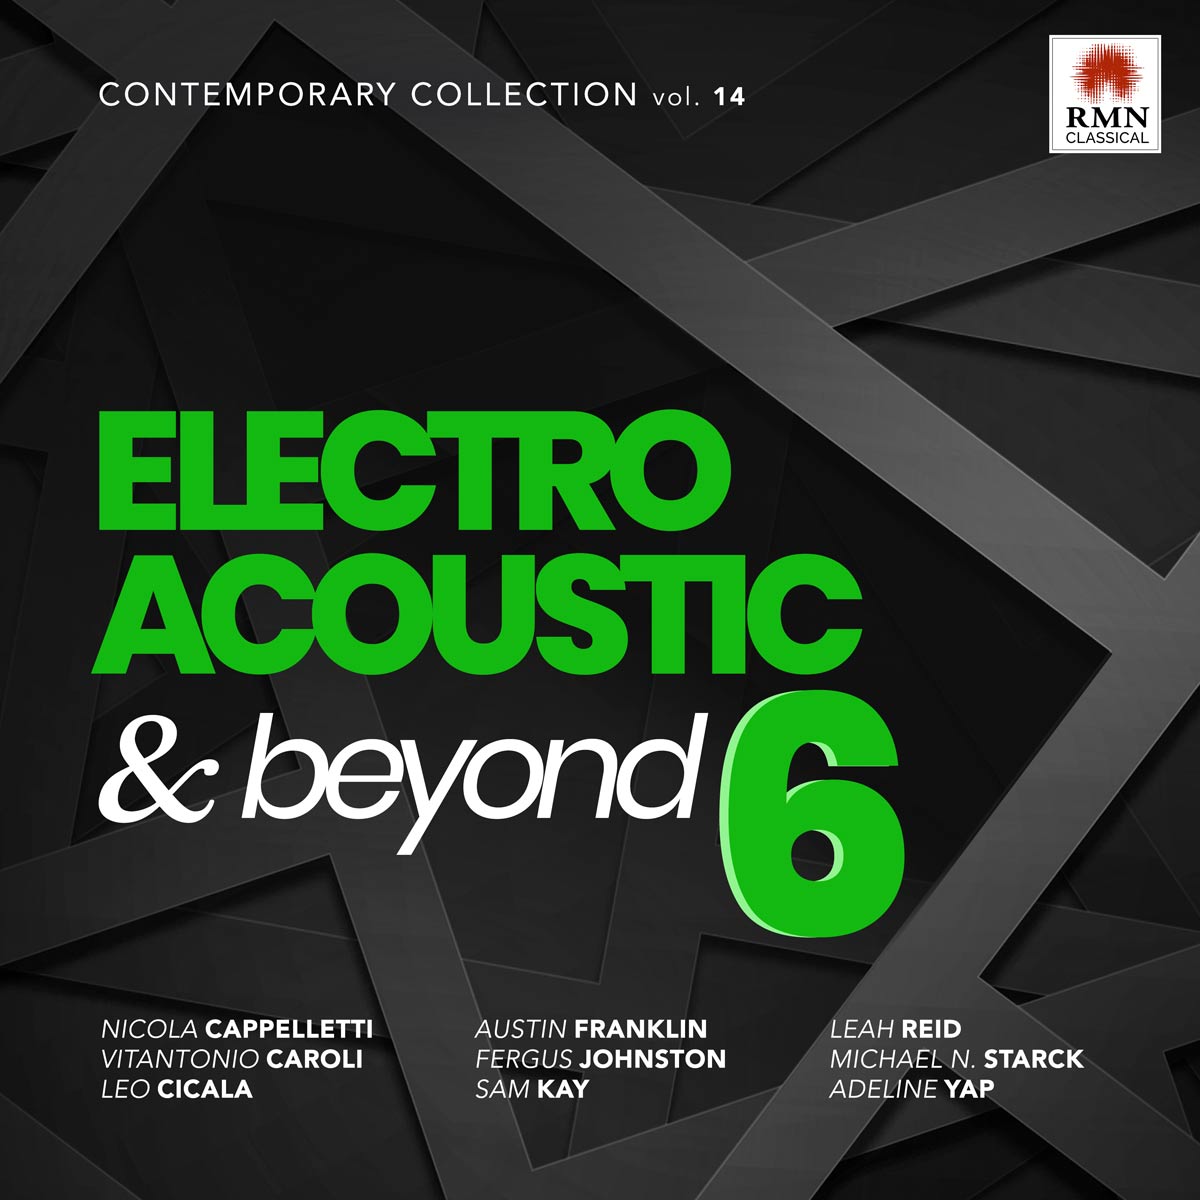 Electroacoustic-&-Beyond-6